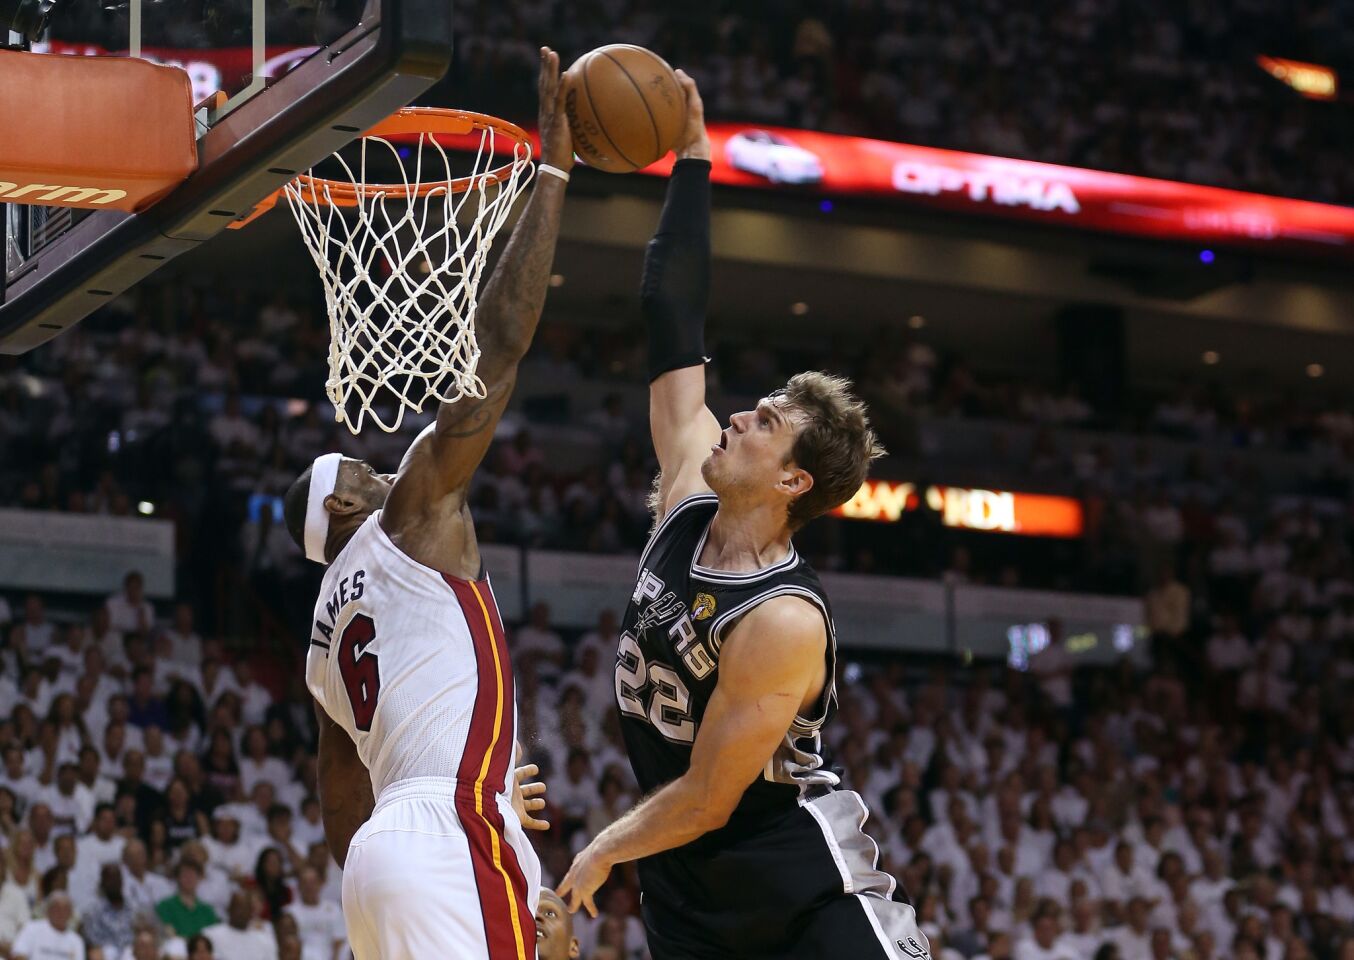 Block party: LeBron James of the Miami Heat blocks the shot of Tiago Splitter of the San Antonio Spurs in the fourth quarter during Game 2 of the 2013 NBA Finals at American Airlines Arena in Miami.